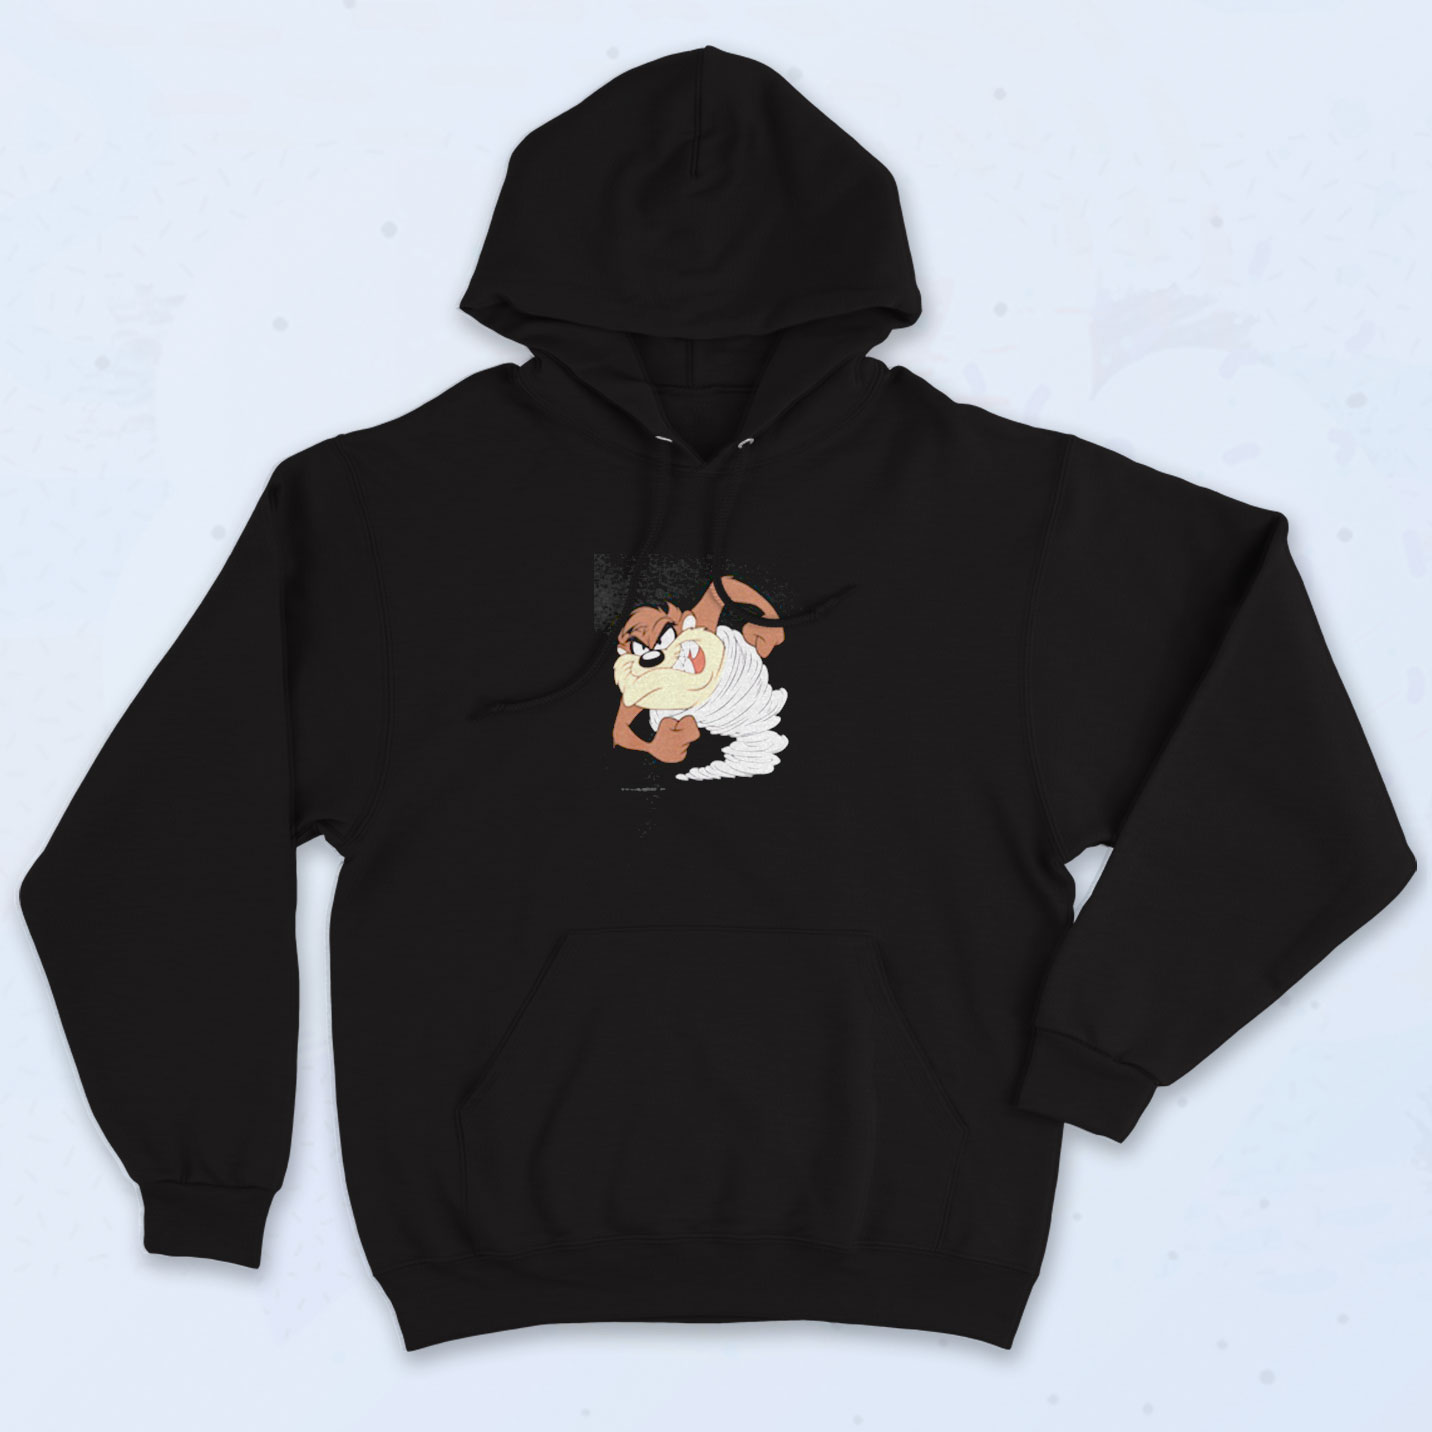 Tasmanian Devil Spinning Fast Aesthetic Hoodie - 90sclothes.com